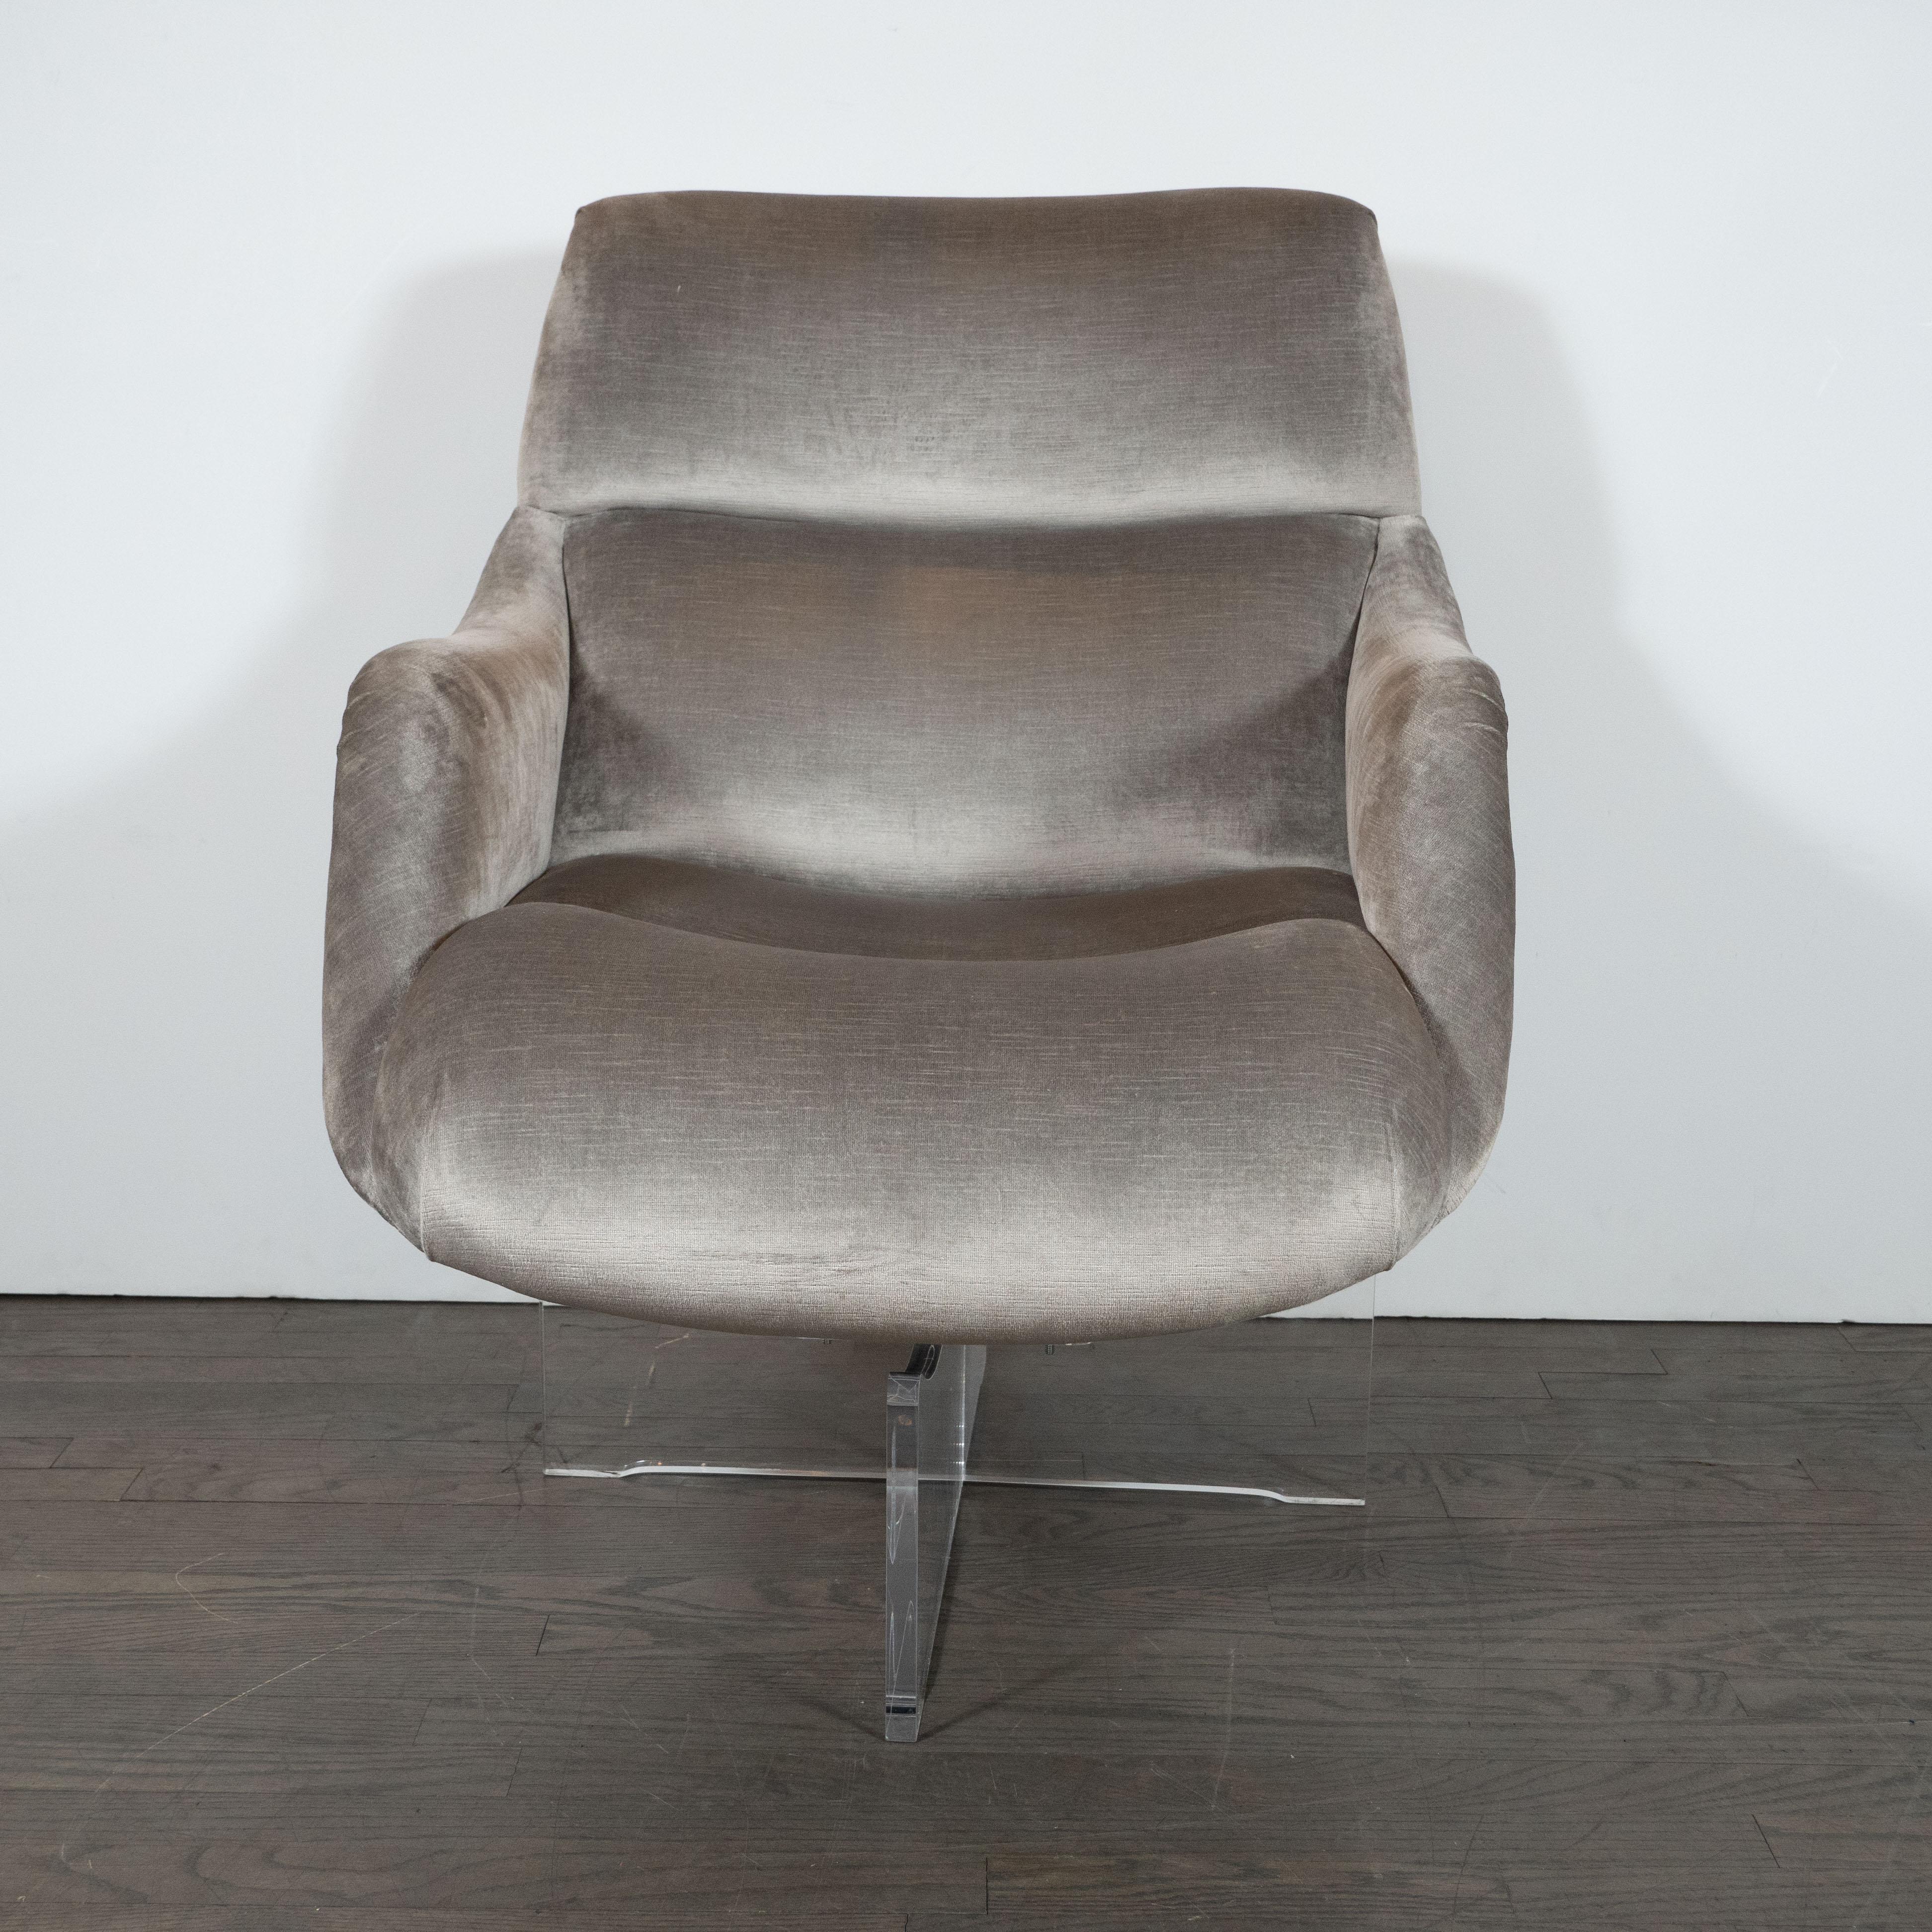 This stunning and iconic pair of swivel lounge chairs were designed by Vladimir Kagan and hand fabricated in the United States, circa 1970. They chairs feature a sculptural X-form base in Lucite with subtly bowed tops; sinuously curved arm rests;